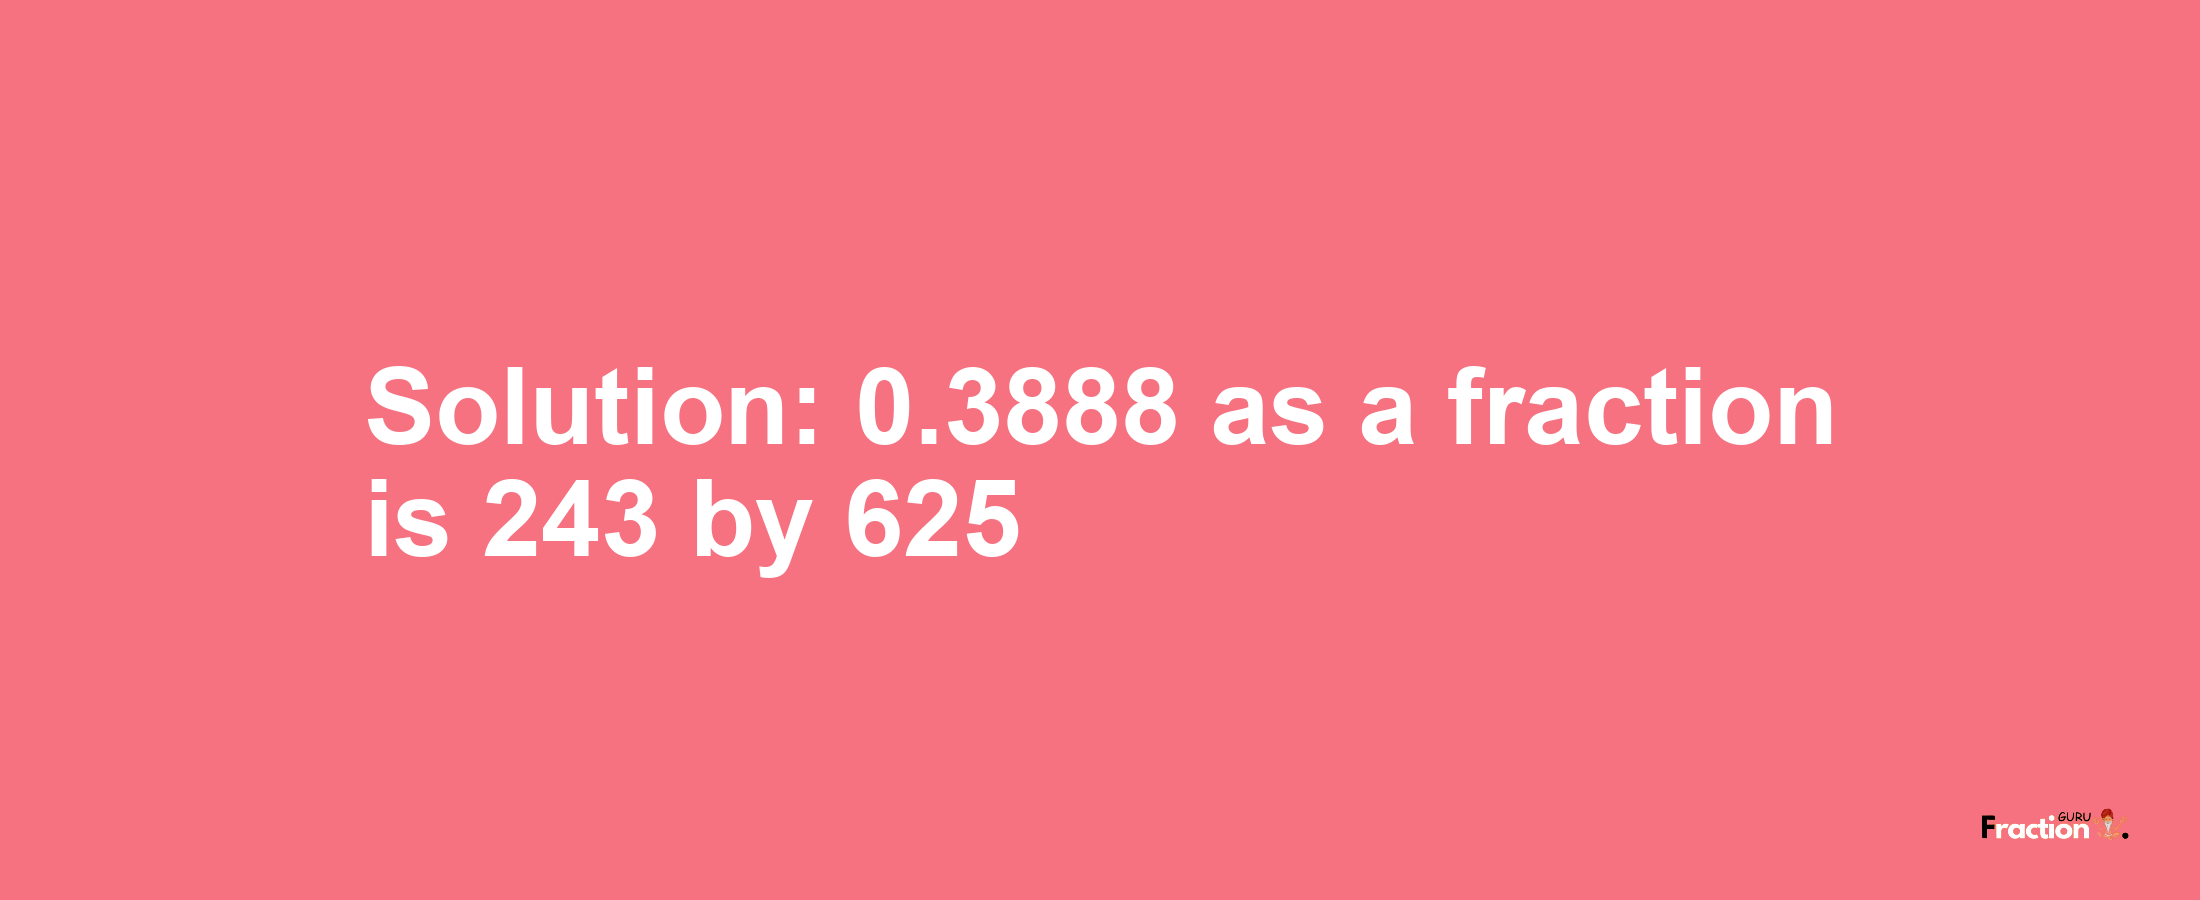 Solution:0.3888 as a fraction is 243/625